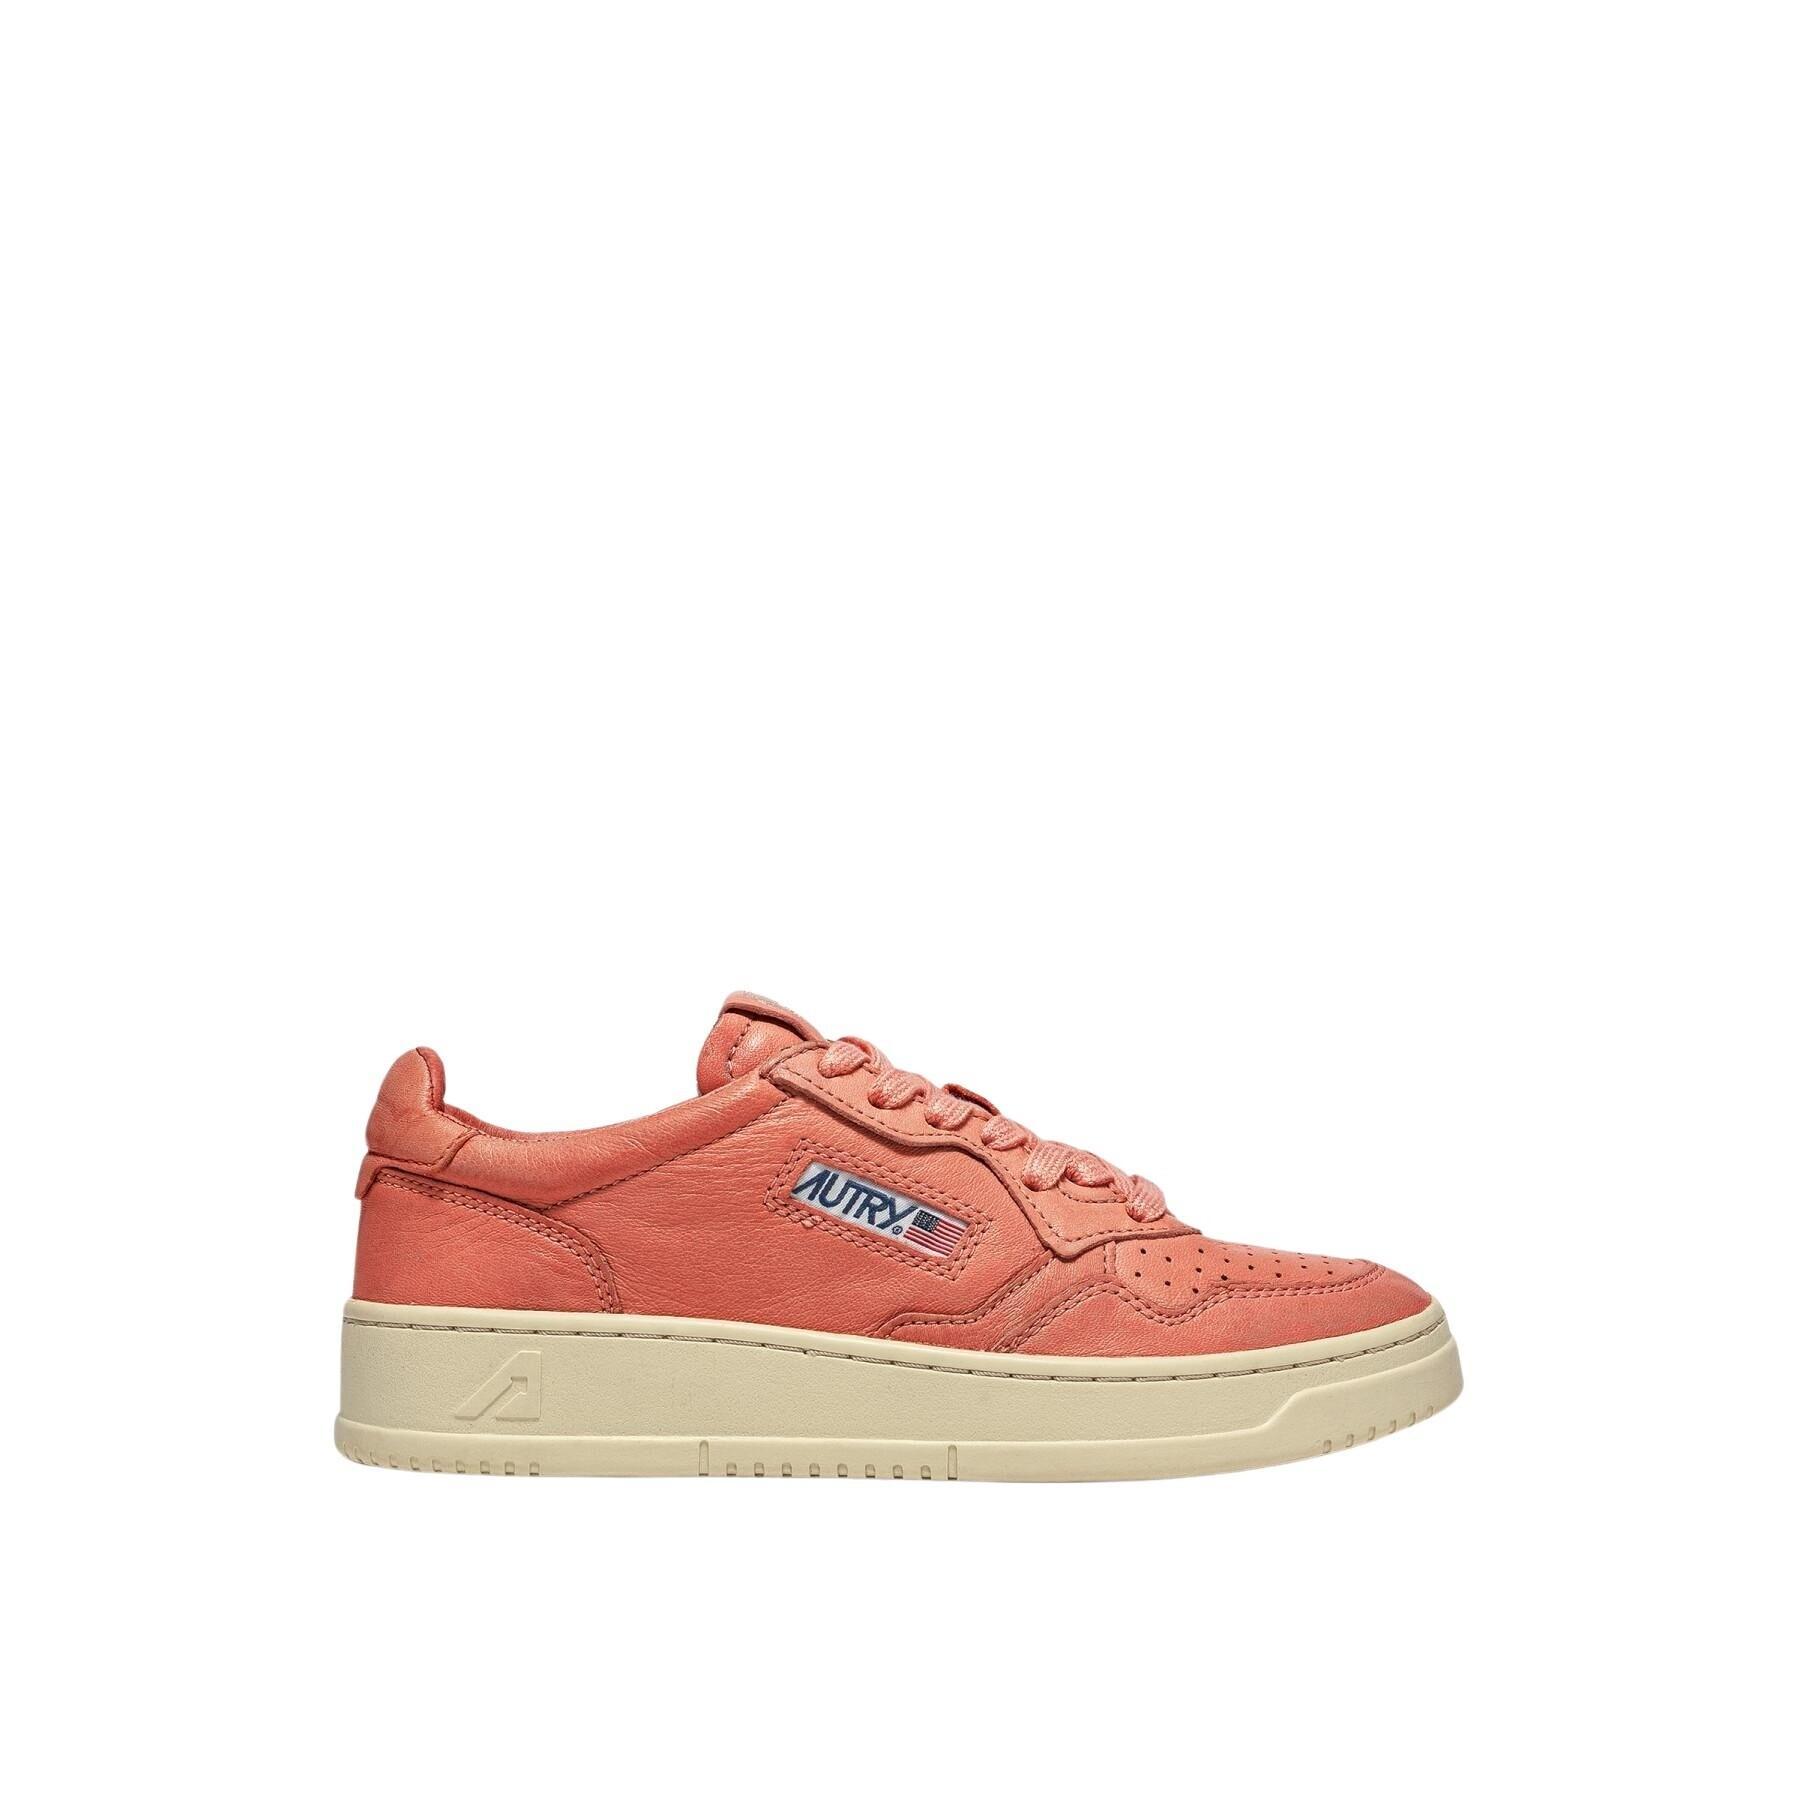 Frauenturnschuhe Autry 01 Low Goat/Goat Living Coral